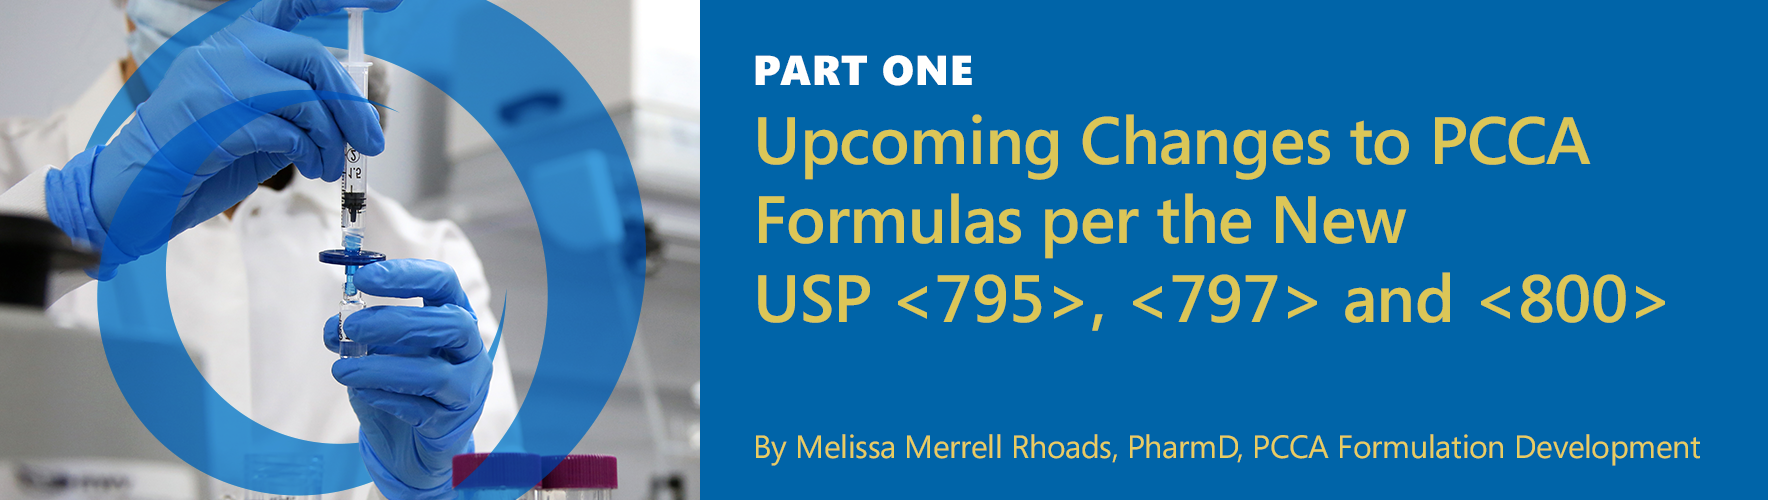 Upcoming_changes_to_pcca_formulas_per_the_new_usp_795_797_and_800_part_one.png.